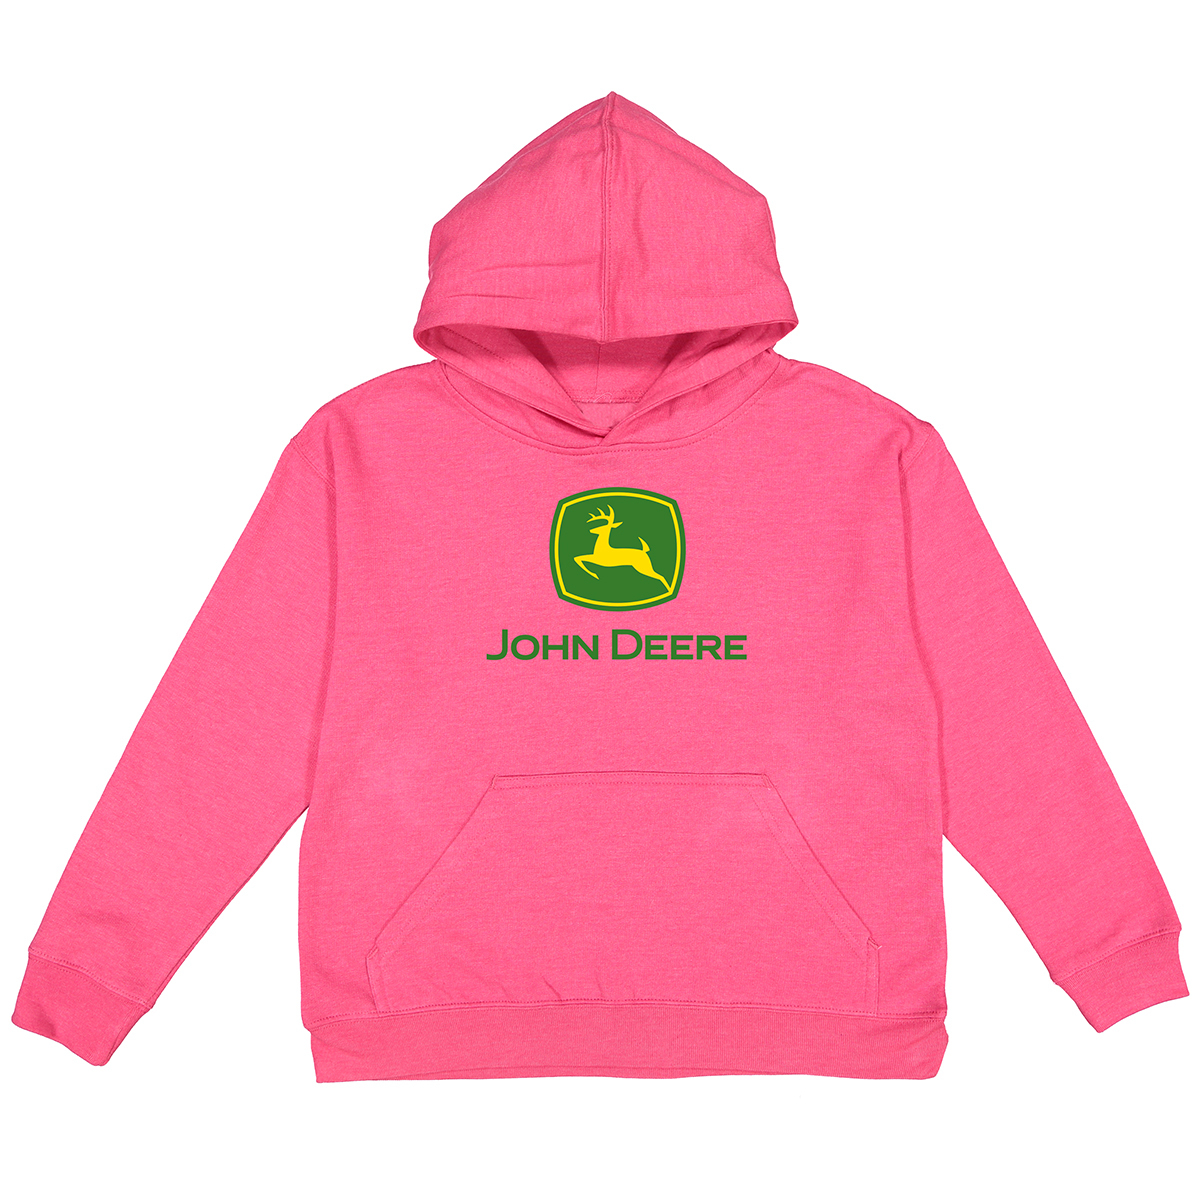 Authentic John Deere Women's Green Hoodie with Pink Plaid 1837 and JD Emblem NWT